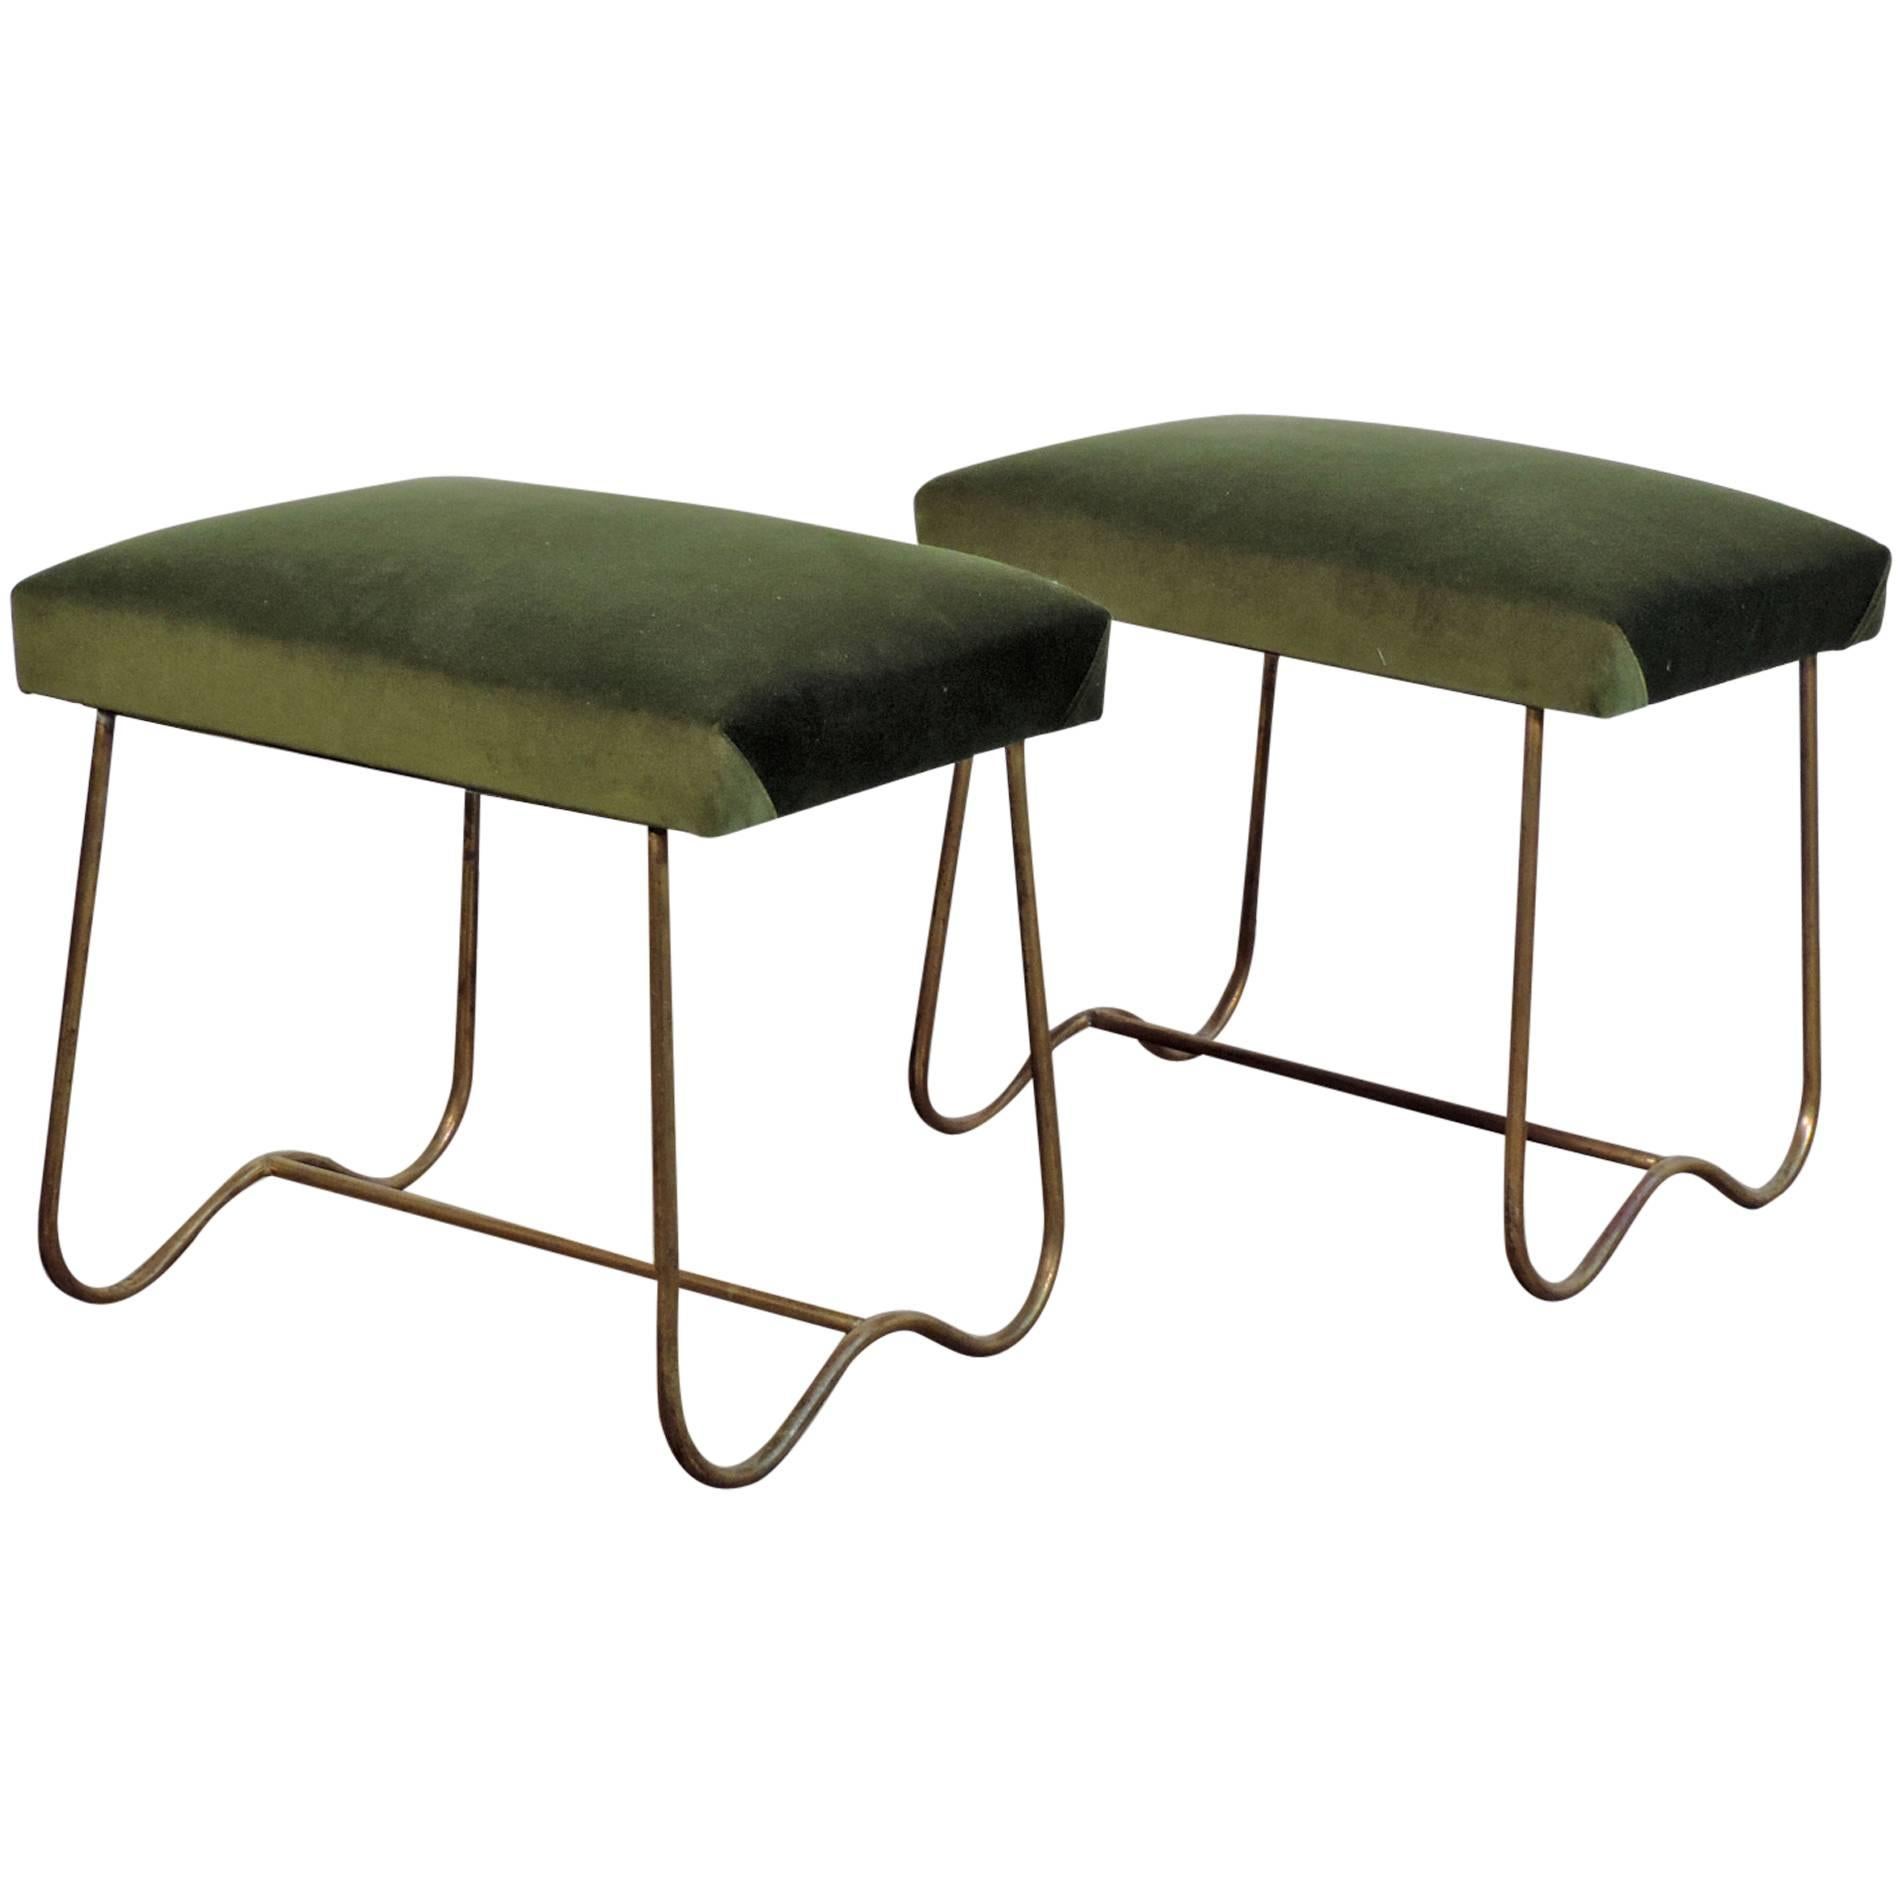 Wonderful 1950s Pair of Stools in the Style of Jean Royère